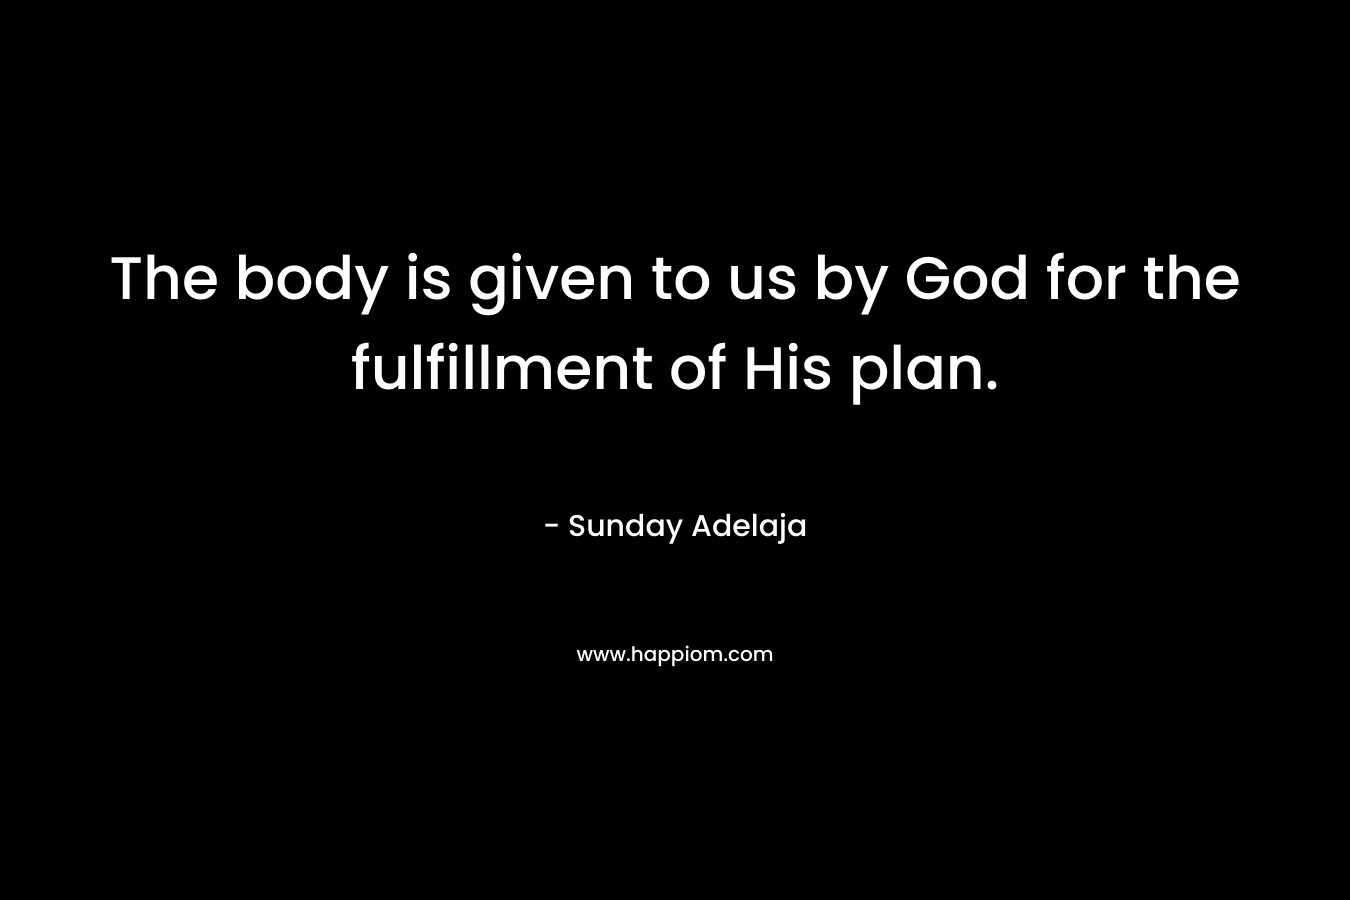 The body is given to us by God for the fulfillment of His plan.